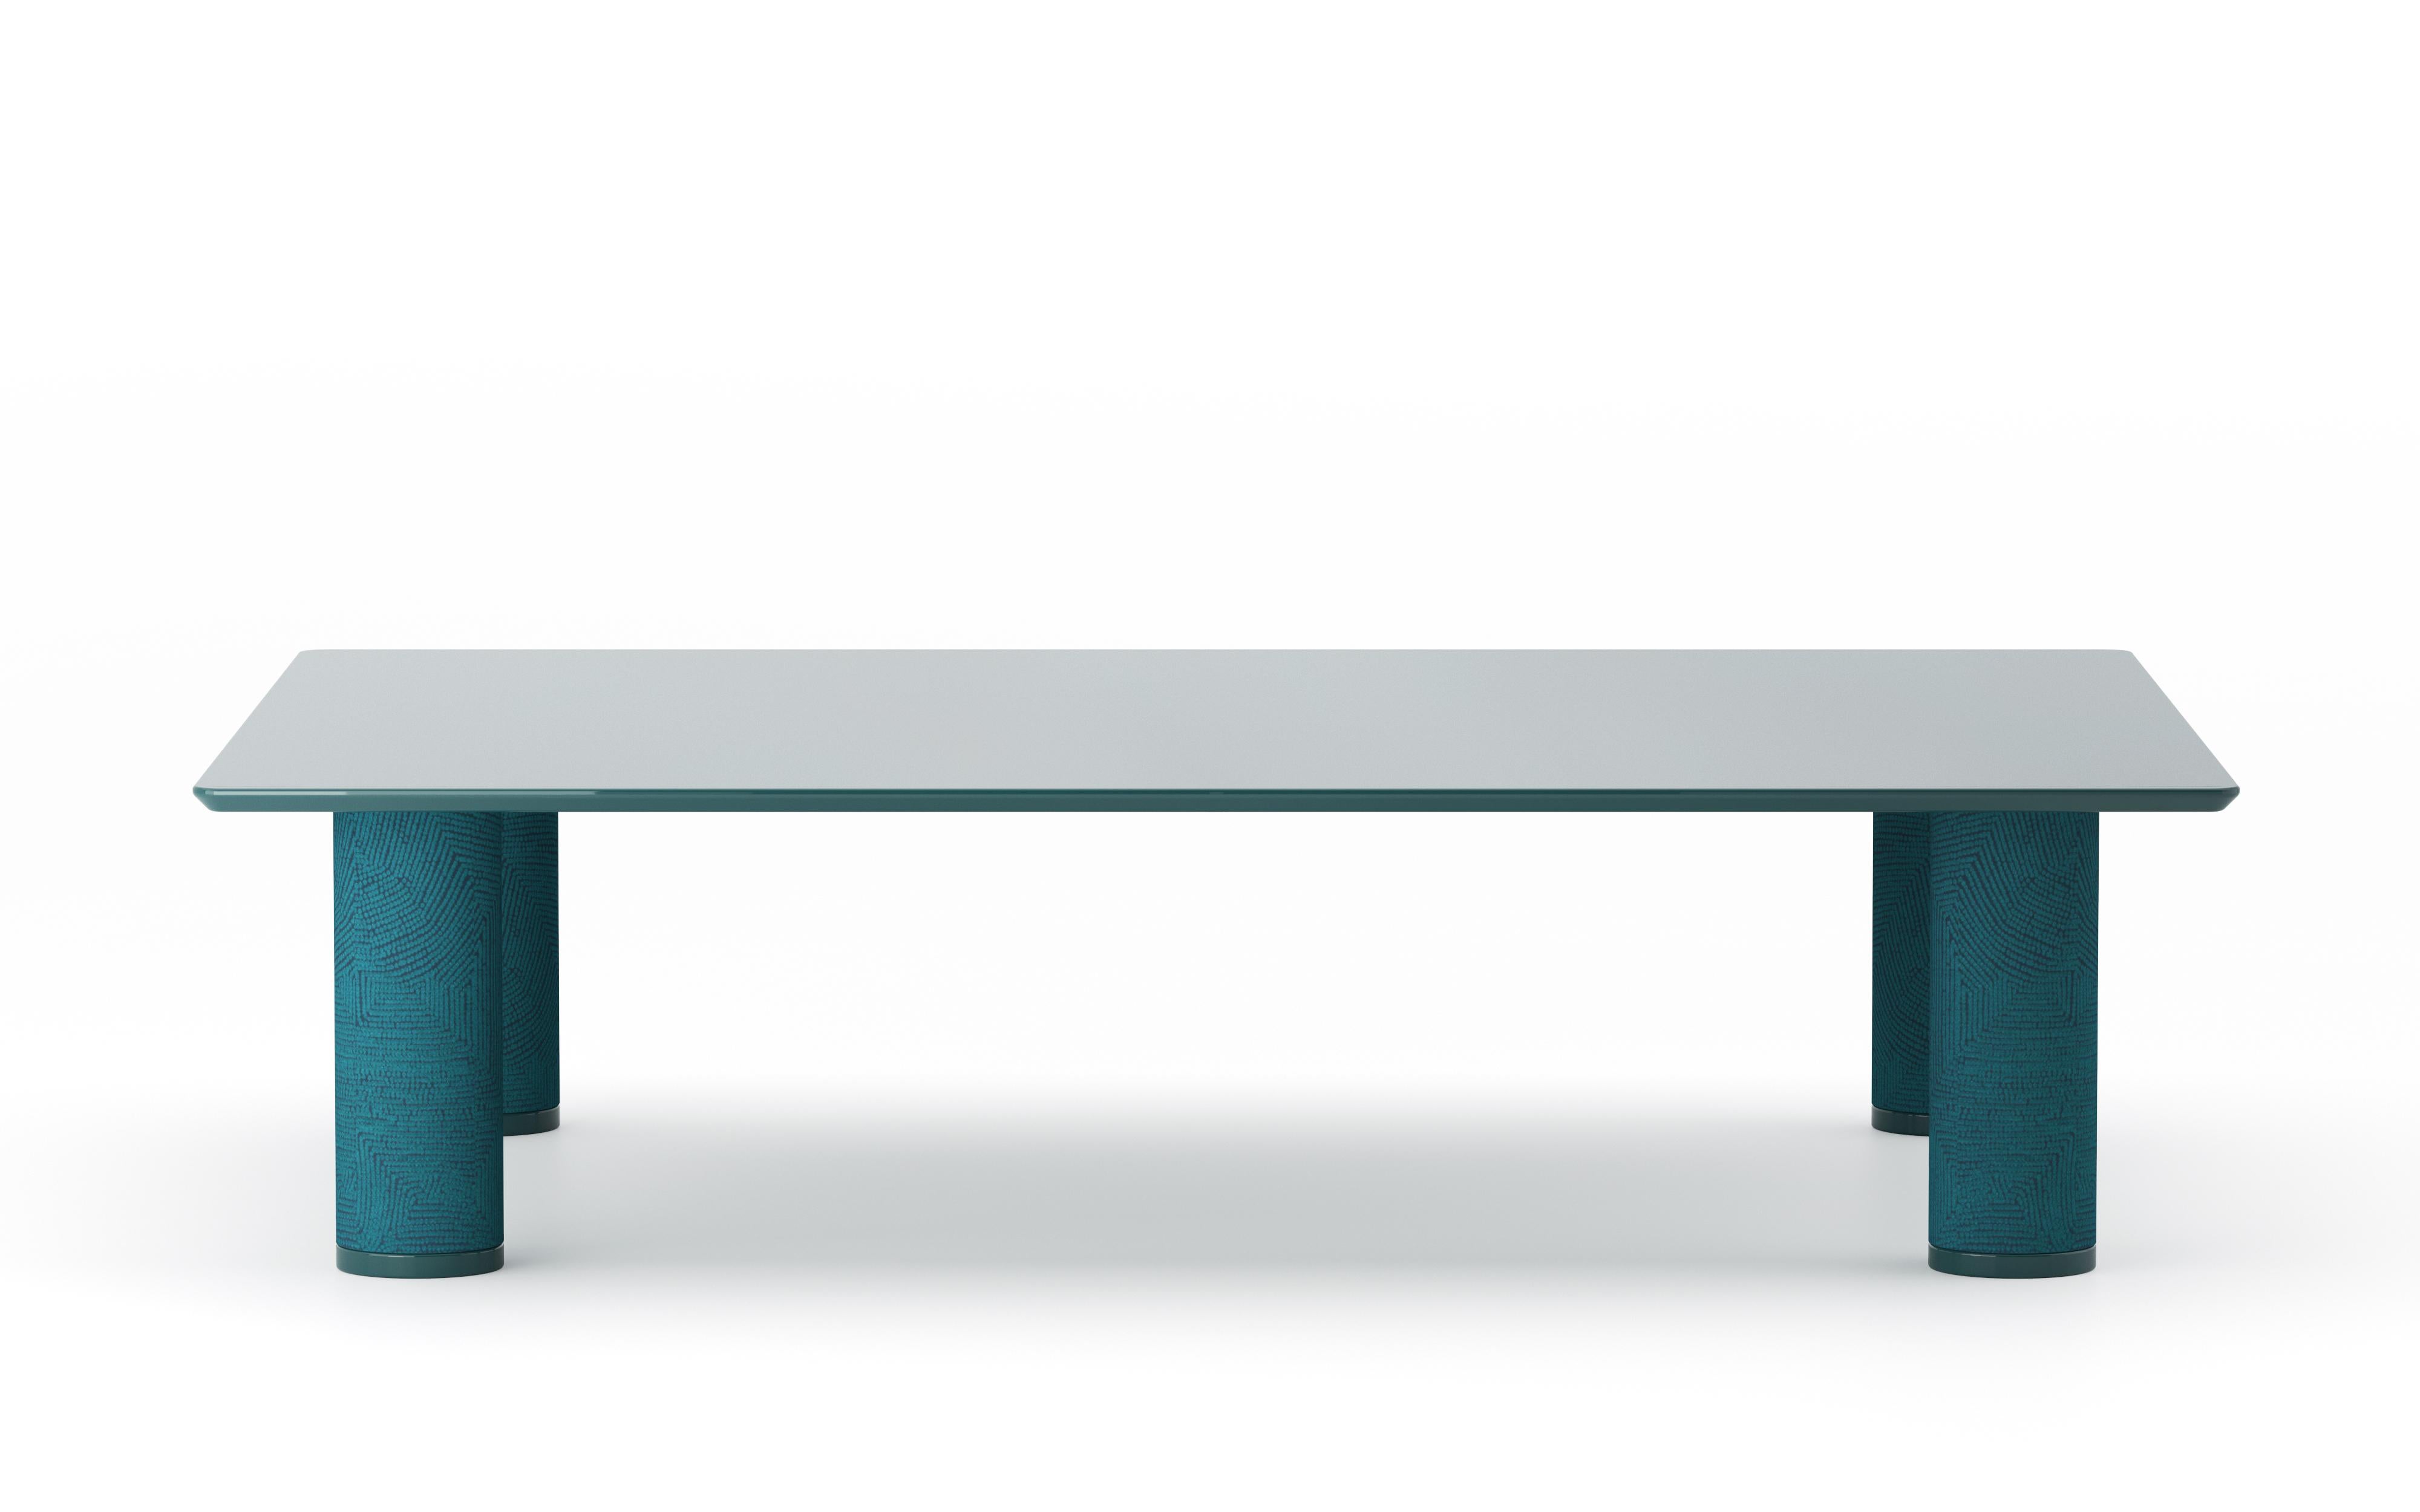 UMA Rectangular is a table from the collection of the same name designed by Ludovica+Roberto Palomba for P + C Edizioni in spring 2022.
Featuring a rectangular resin top, UMA Rectangular puts the design accent on the table’s cylindrical pedestal